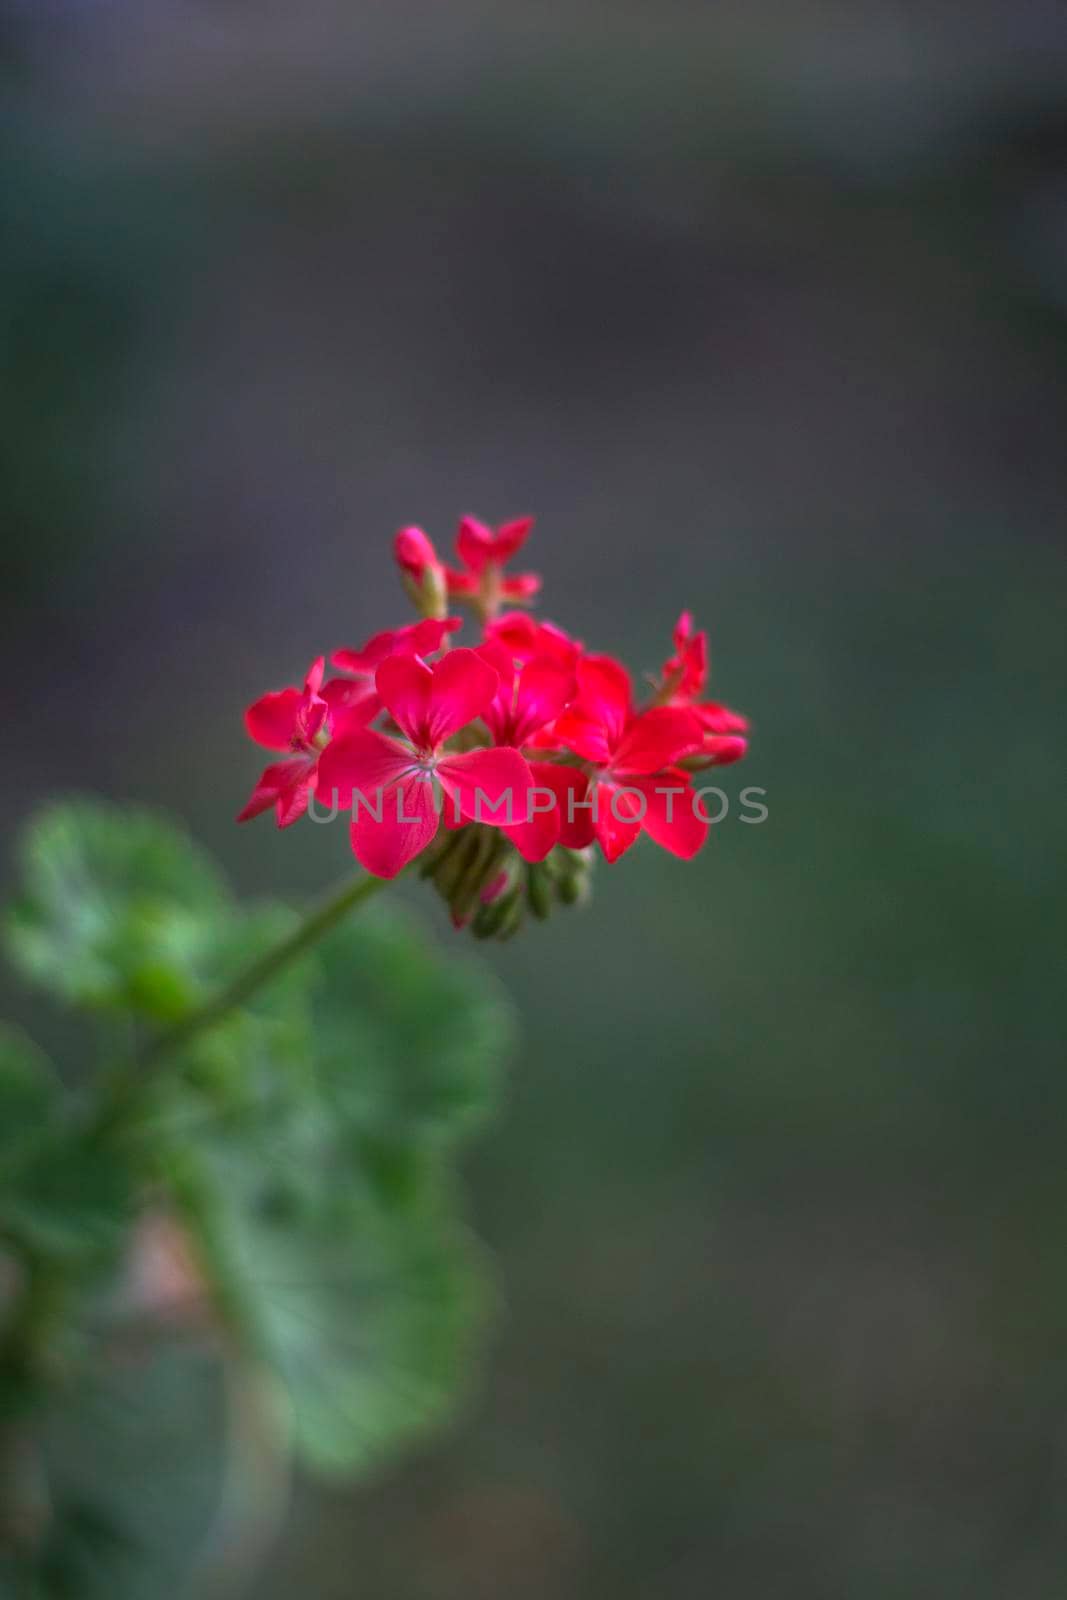 Pelargonium or Geranium flower close look at a cluster of red bloom, buds and green leave. Vertical view by EdVal